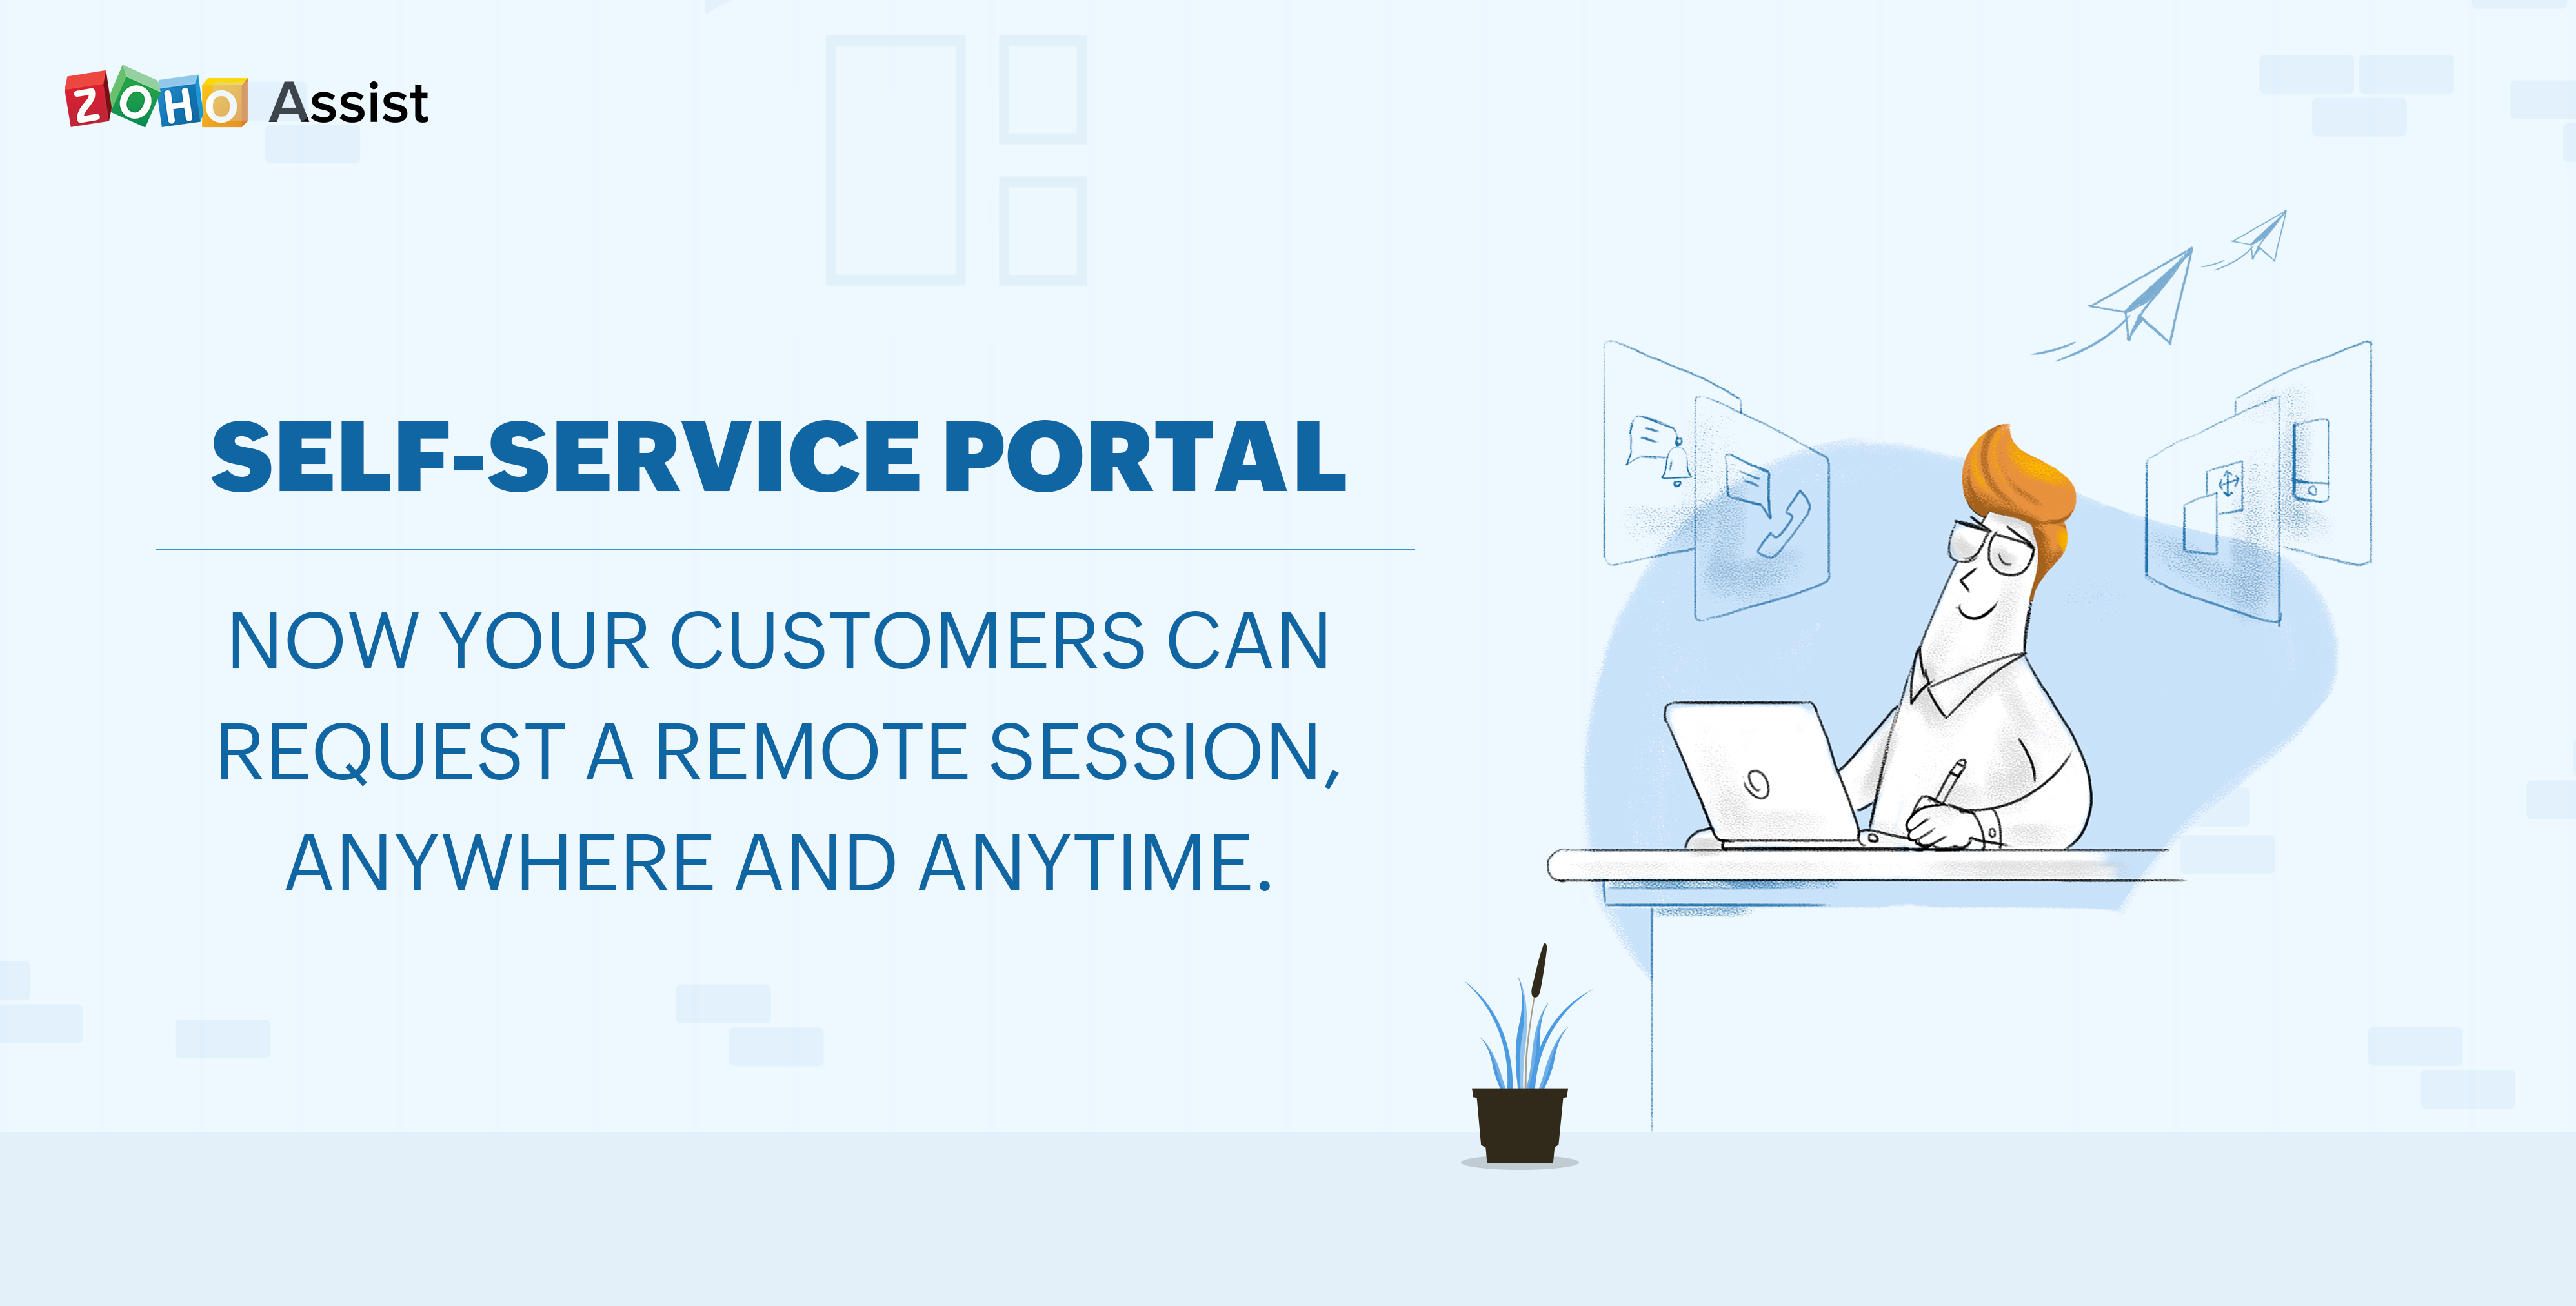 Introducing Zoho Assist’s Self-Service Portal: Remote Support at Your Customer’s Fingertips.